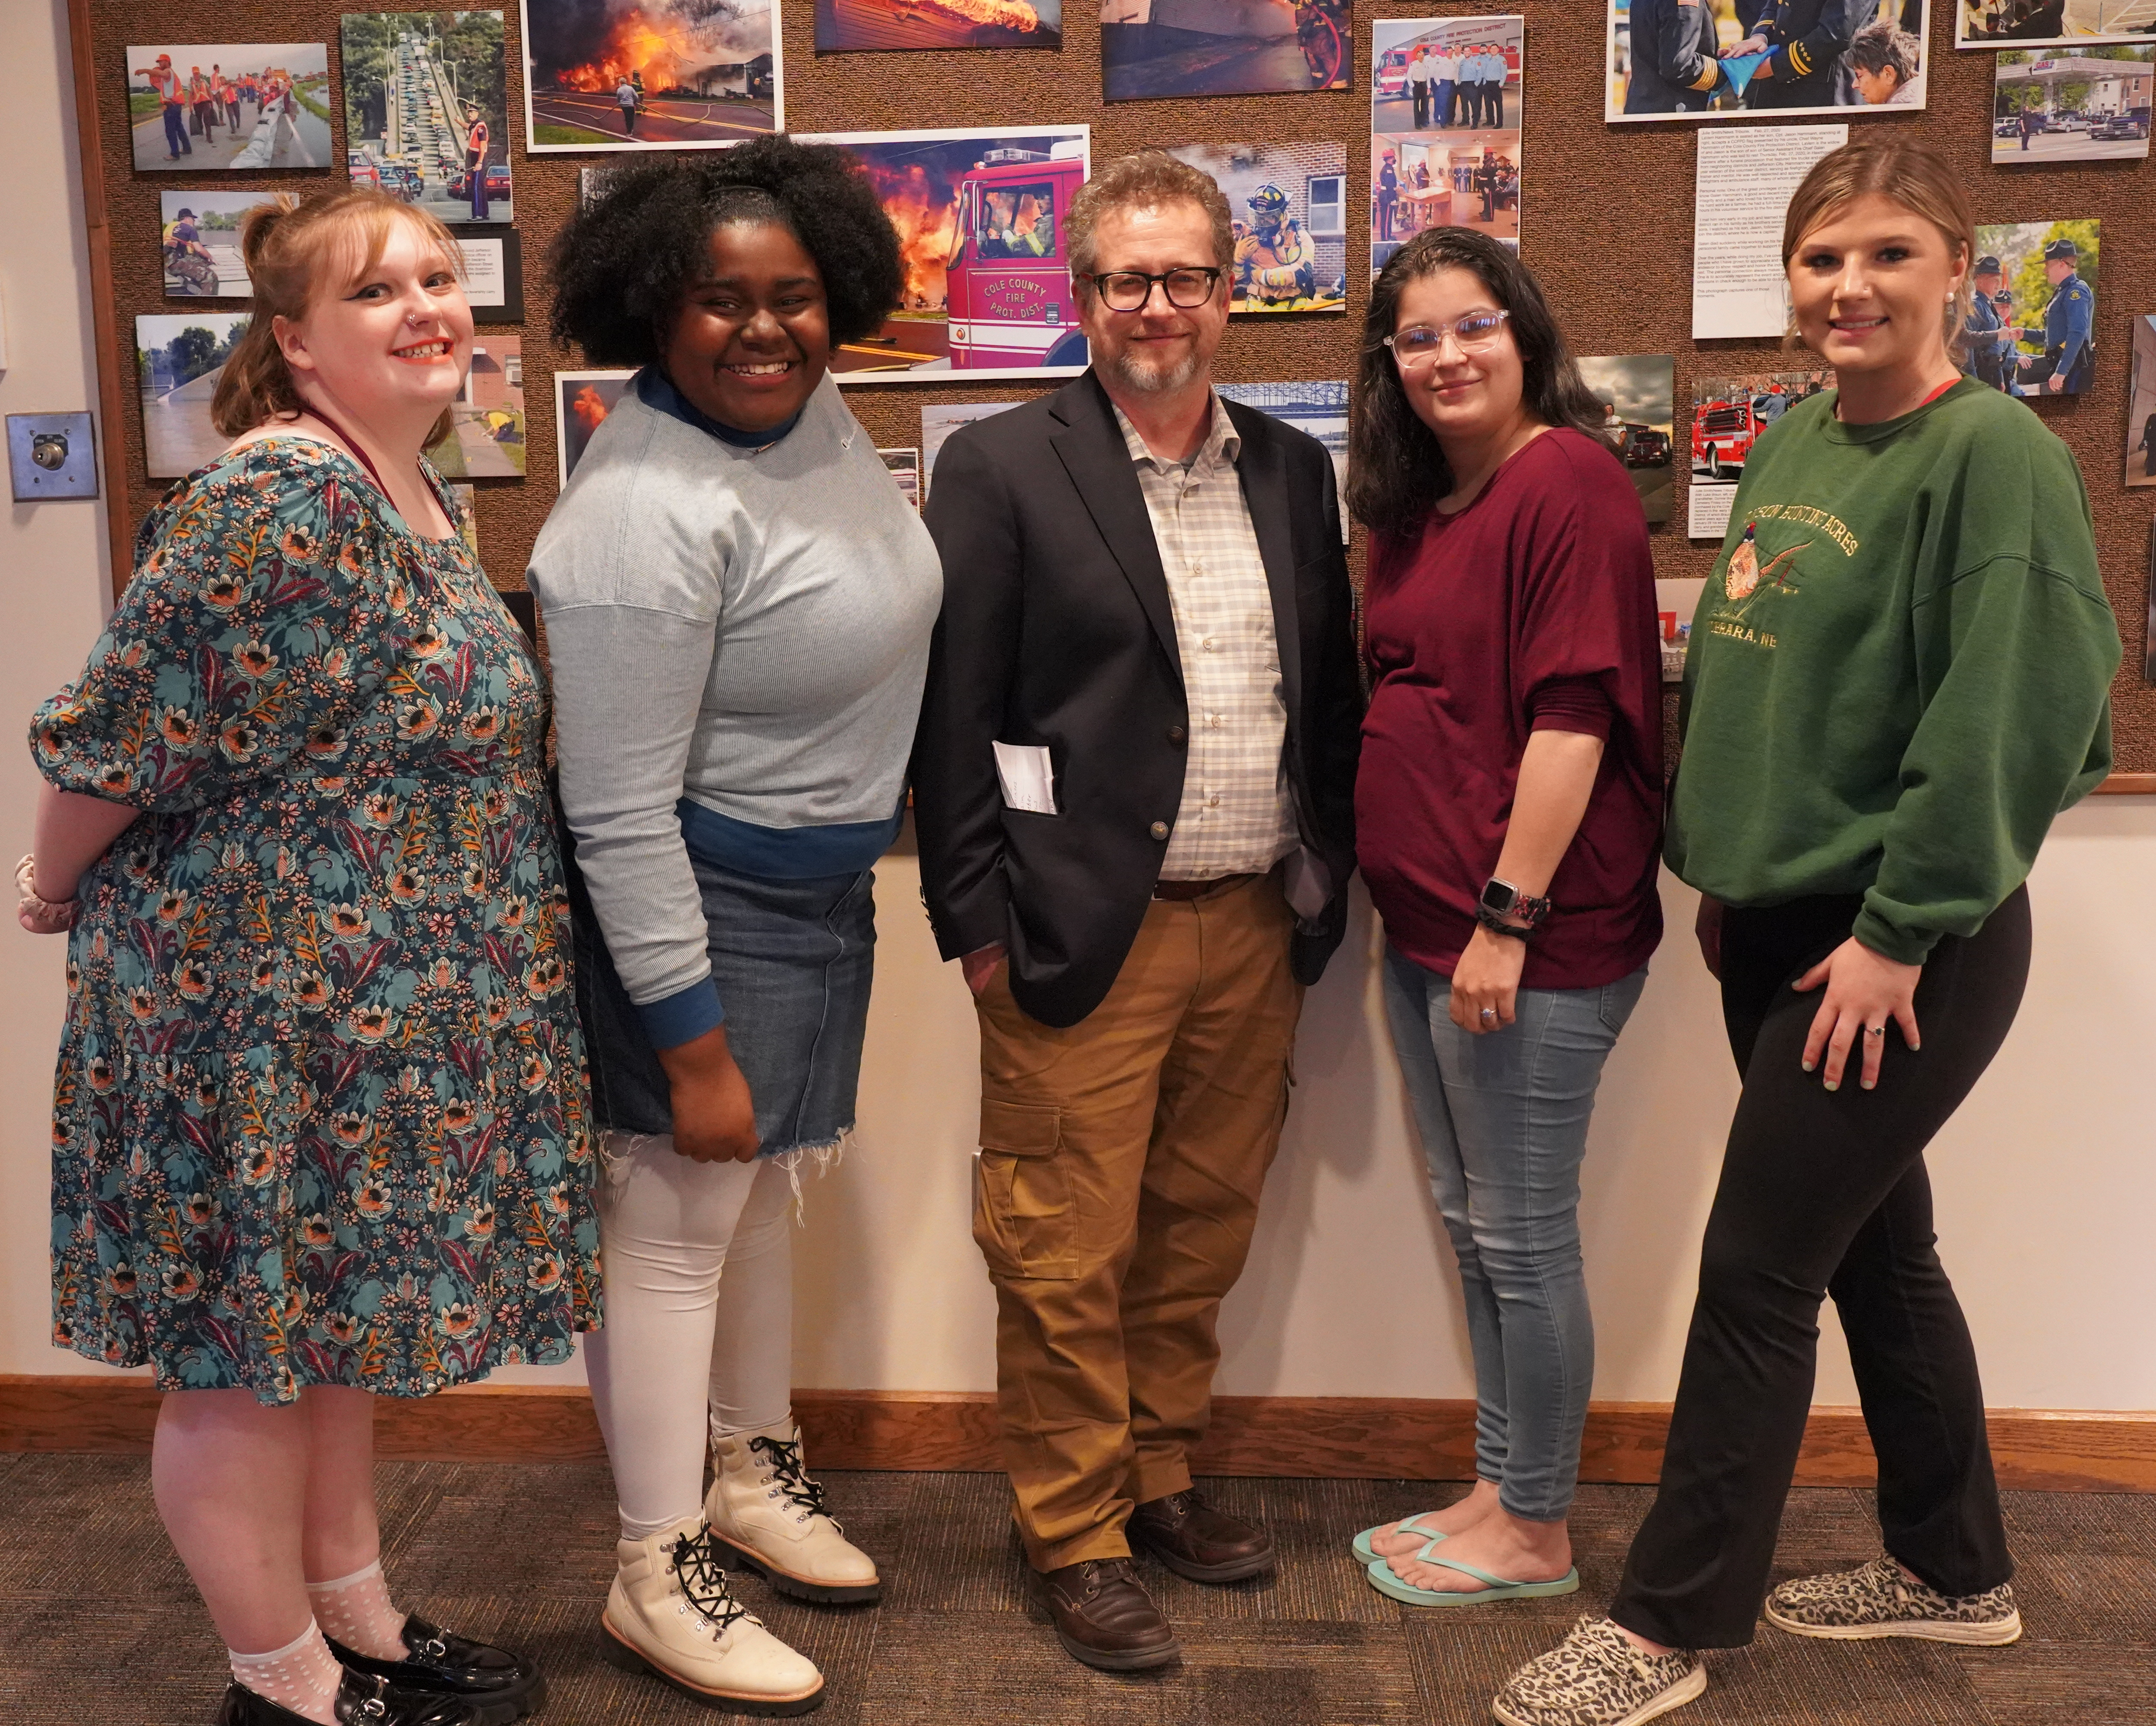 Readers Emily Botts, Chenia Walker, Izabella Ort and Jestine Lange take group photo after reading series with their professor, Daren Dean (middle). 